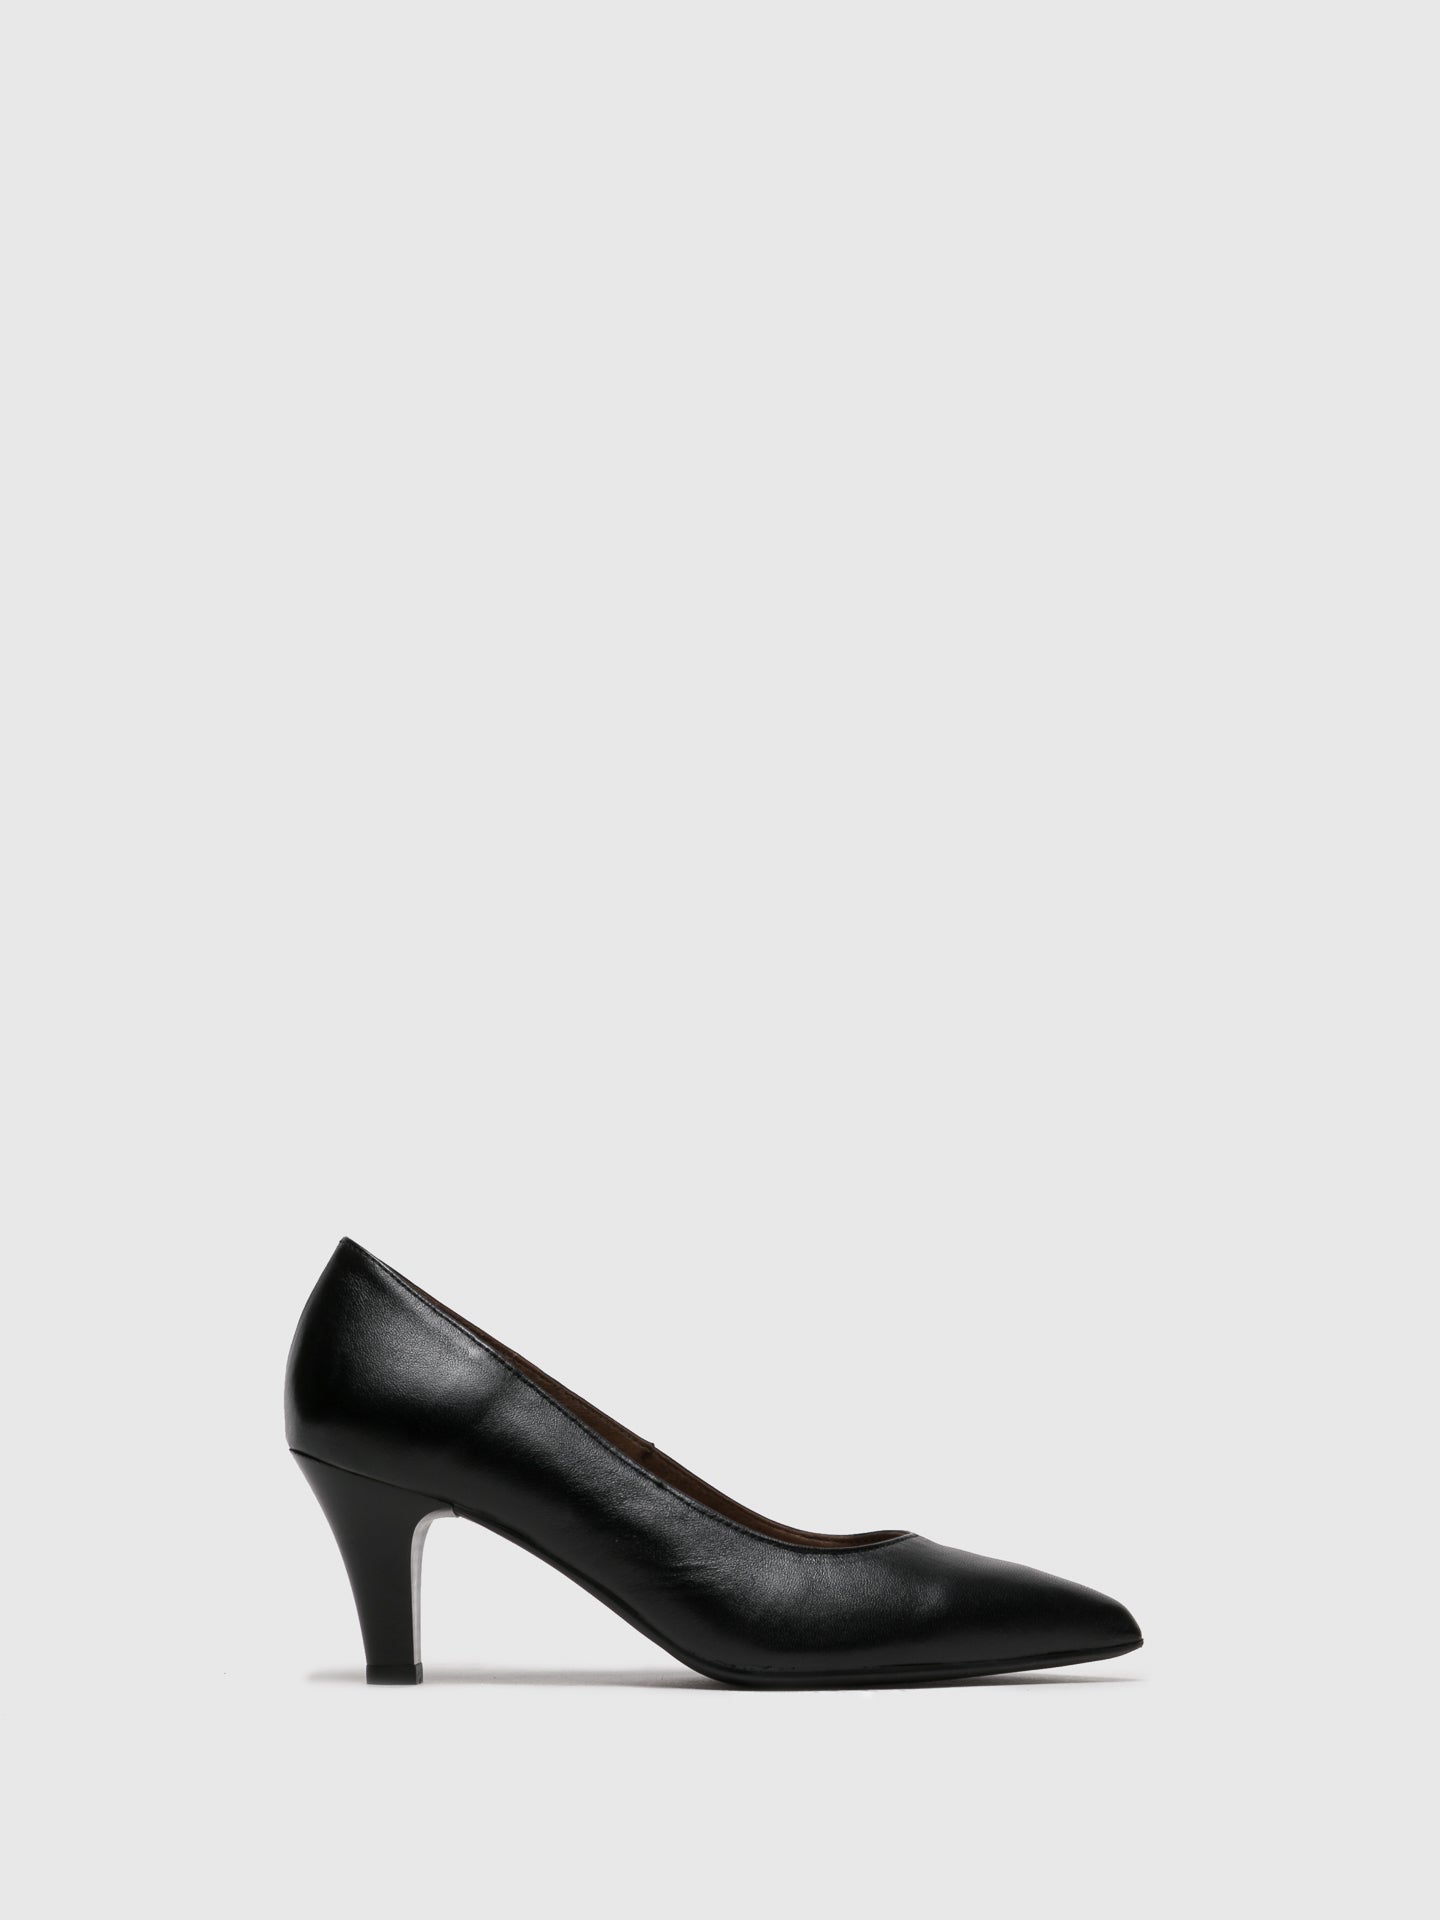 Foreva Black Leather Pointed Toe Pumps